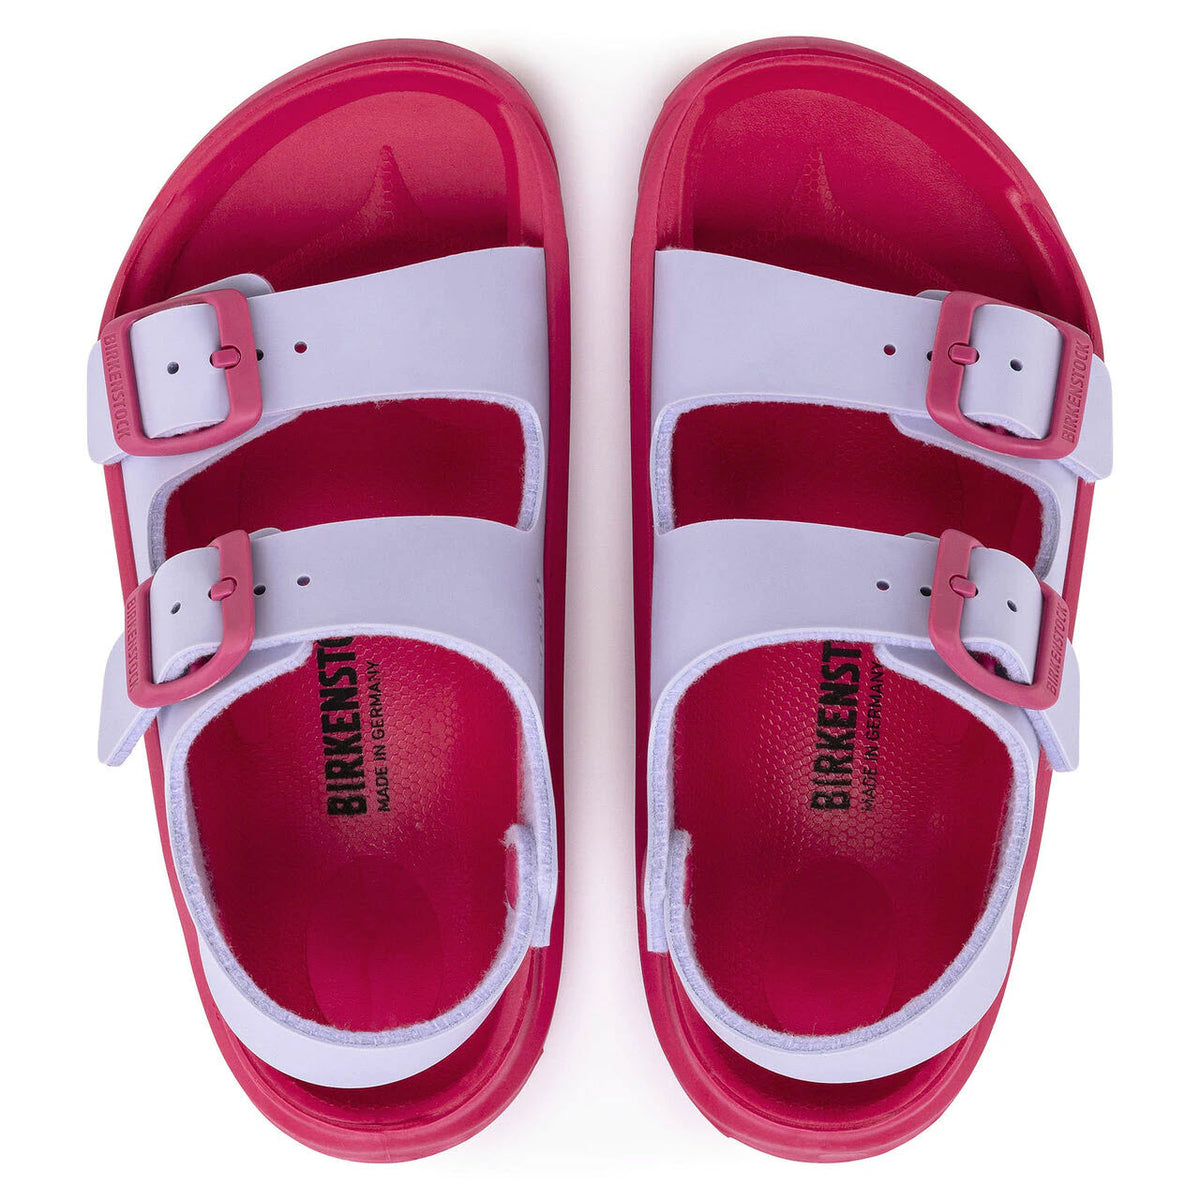 A pair of red and white Birkenstock Mogami slide sandals with adjustable straps and a waterproof footbed.